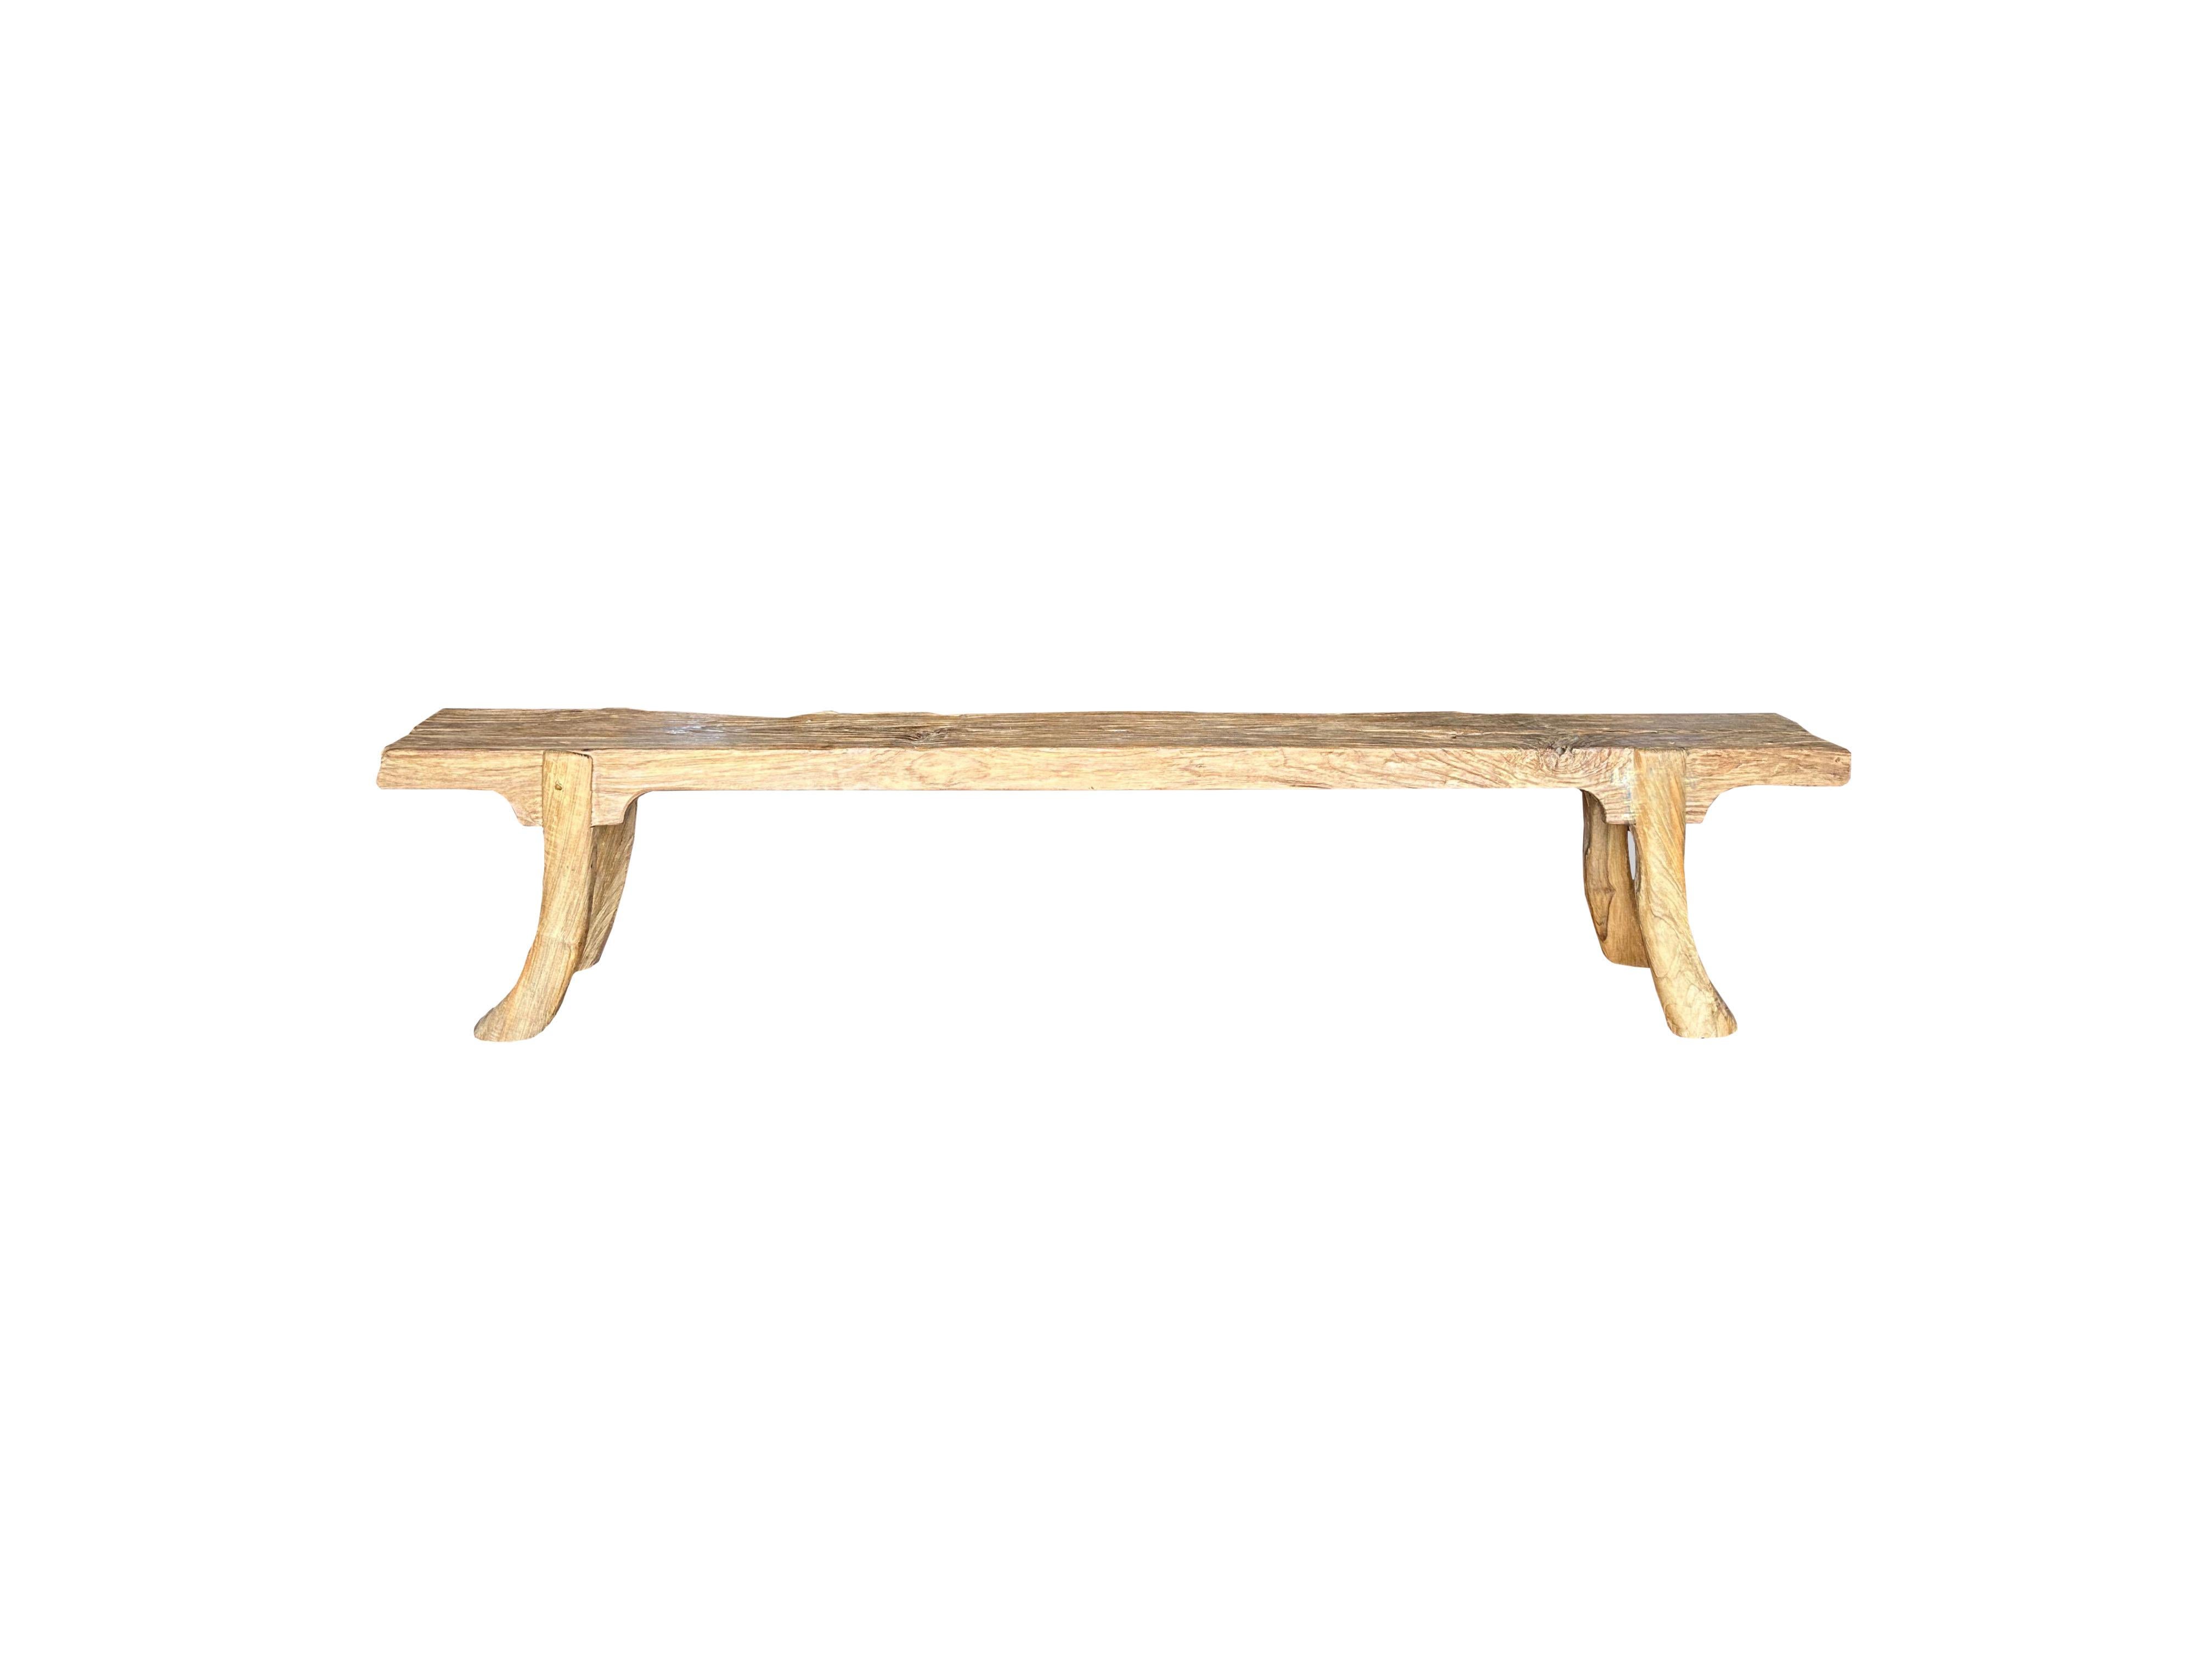 A wonderfully sculptural teak wood bench. This teak wood bench features a wonderful organic form with a mix of wood textures and shades. Elevated by four slender teak wood legs, the seat was carved from a single block of wood. Carved by artisans on